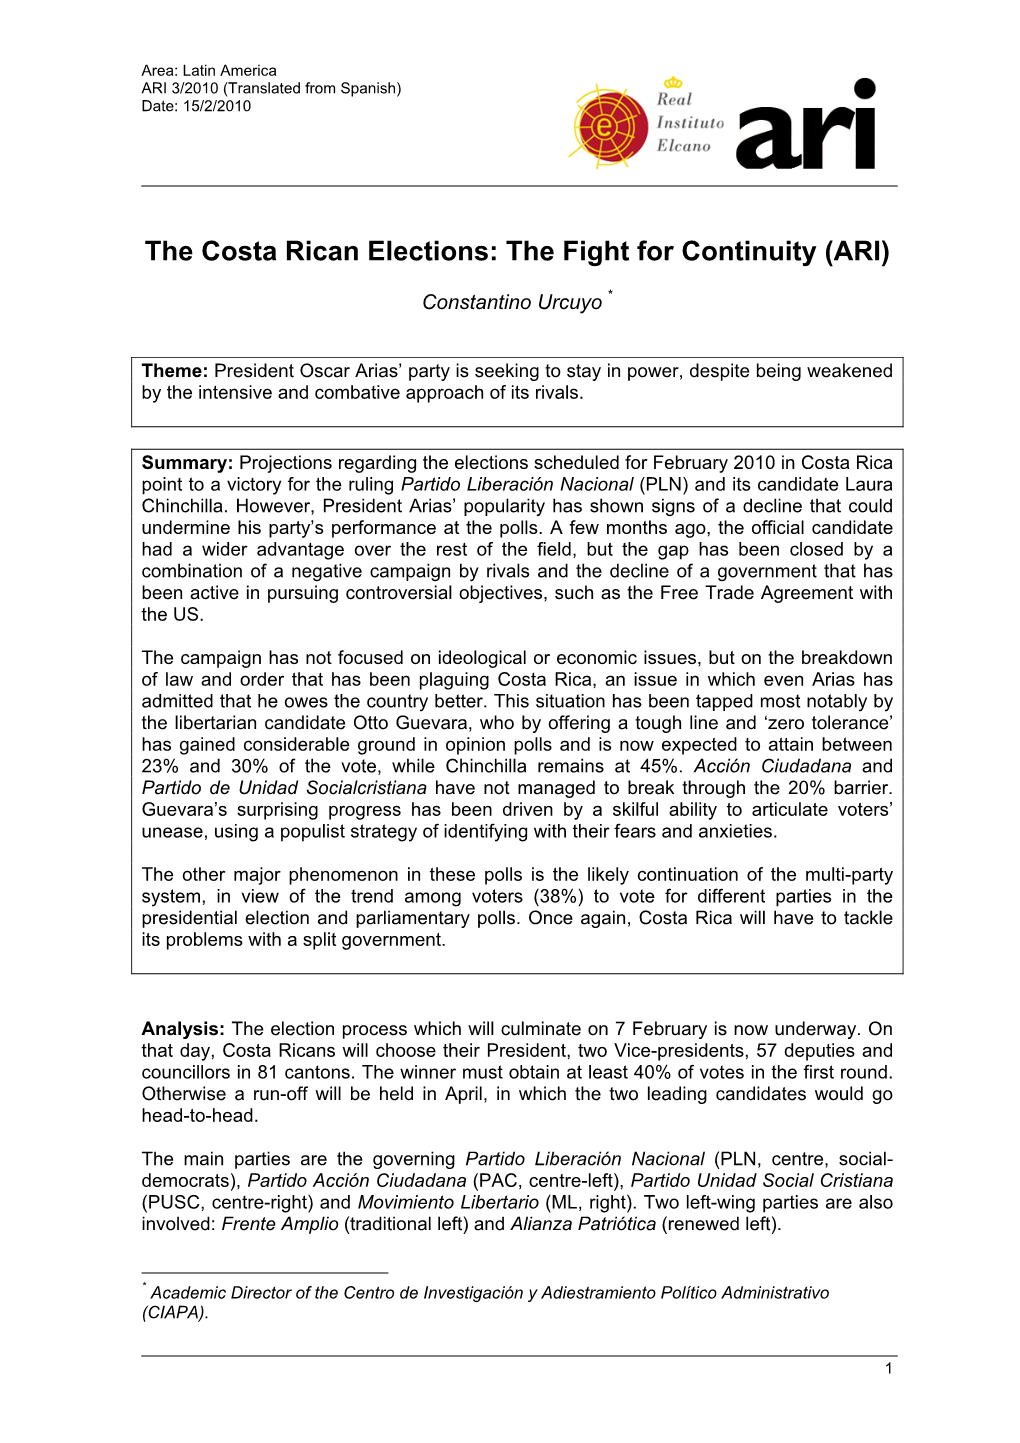 The Costa Rican Elections: the Fight for Continuity (ARI)